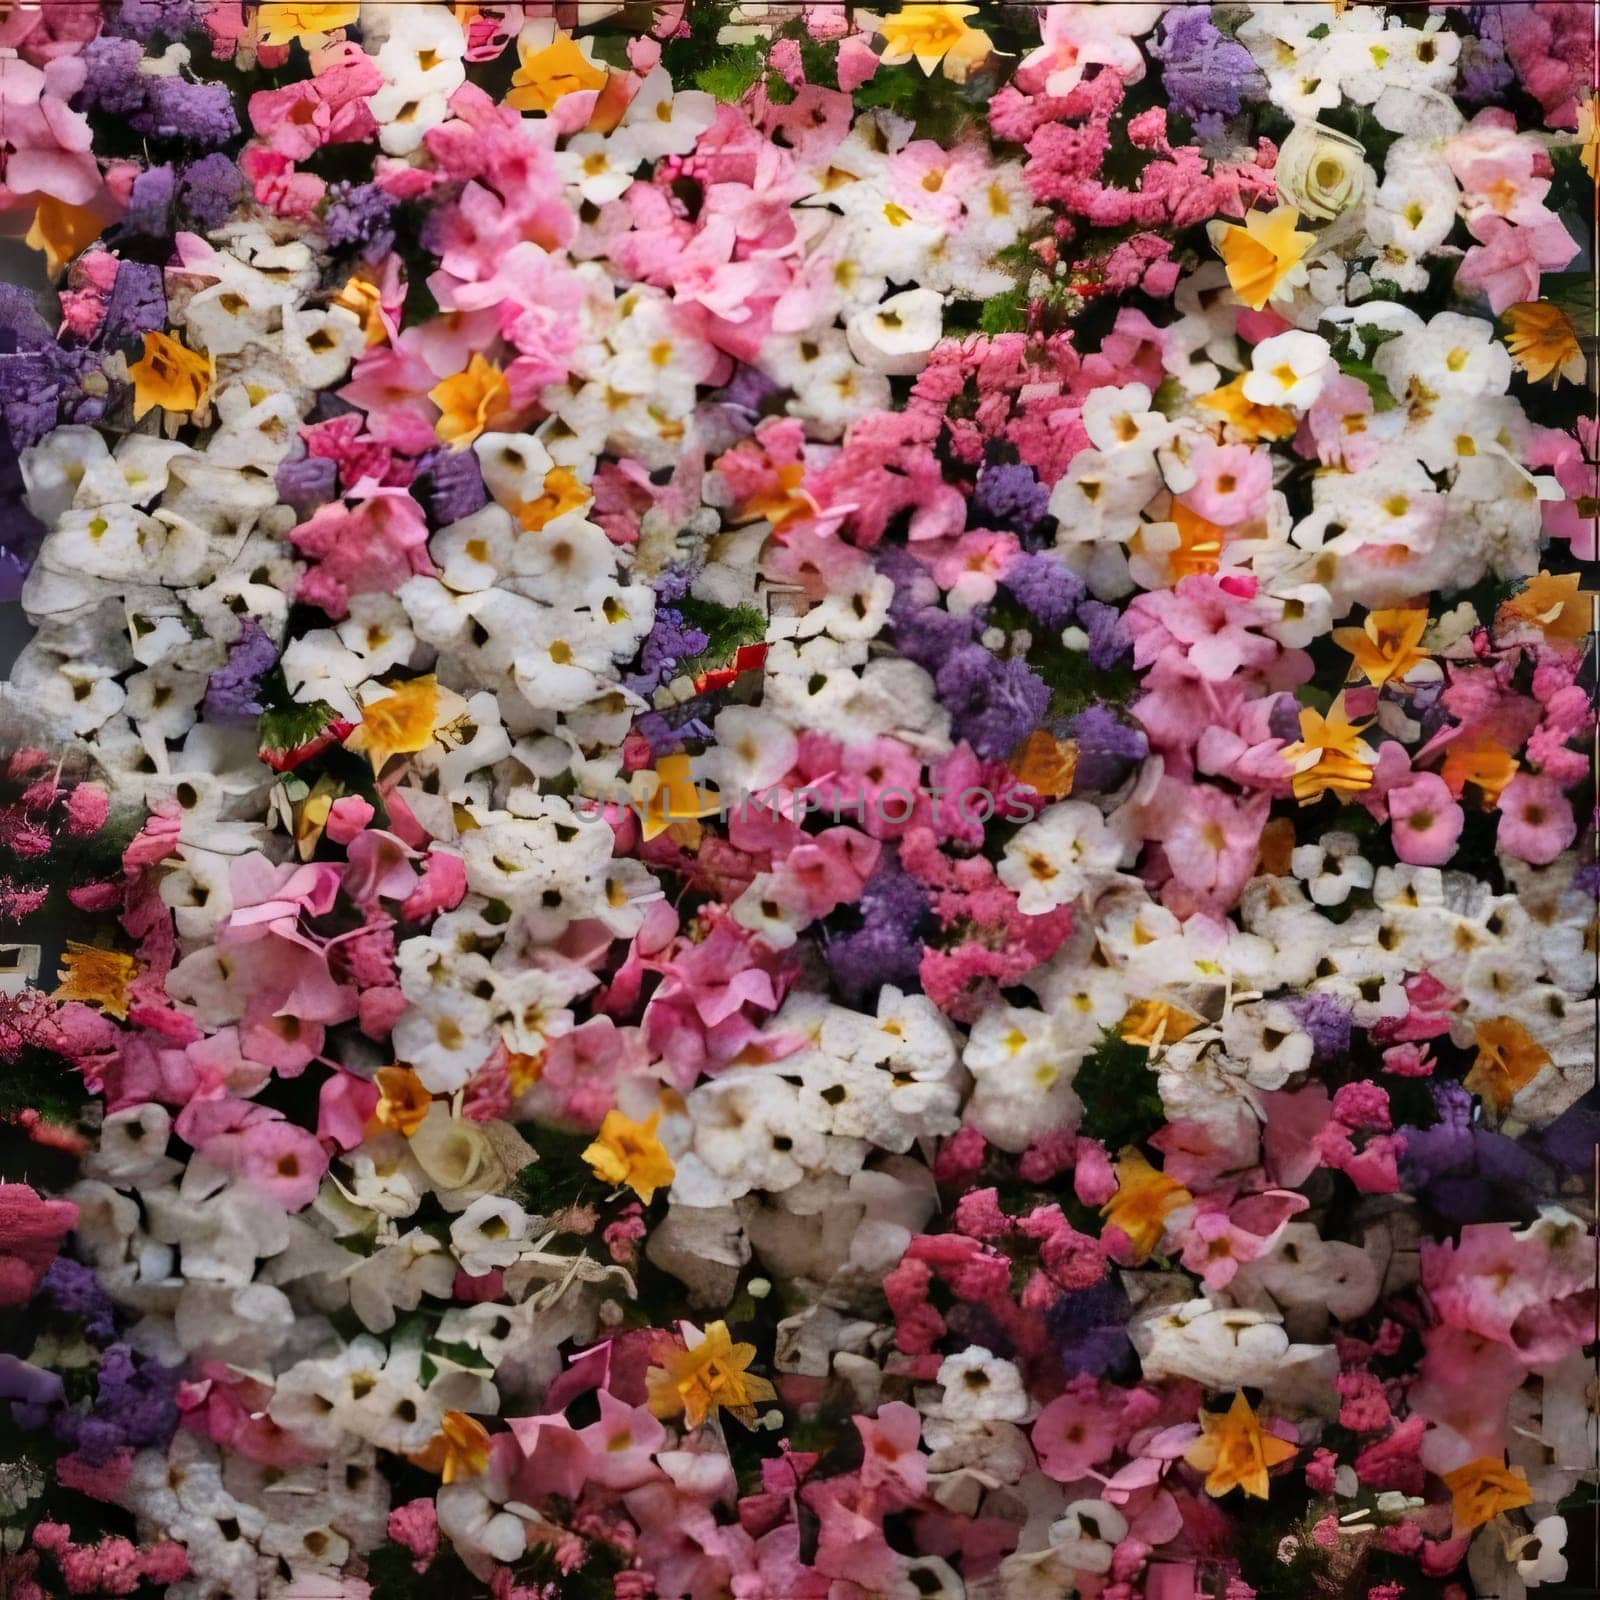 Top view of hundreds of colorful pink, white yellow flowers. Flowering flowers, a symbol of spring, new life. A joyful time of nature waking up to life.